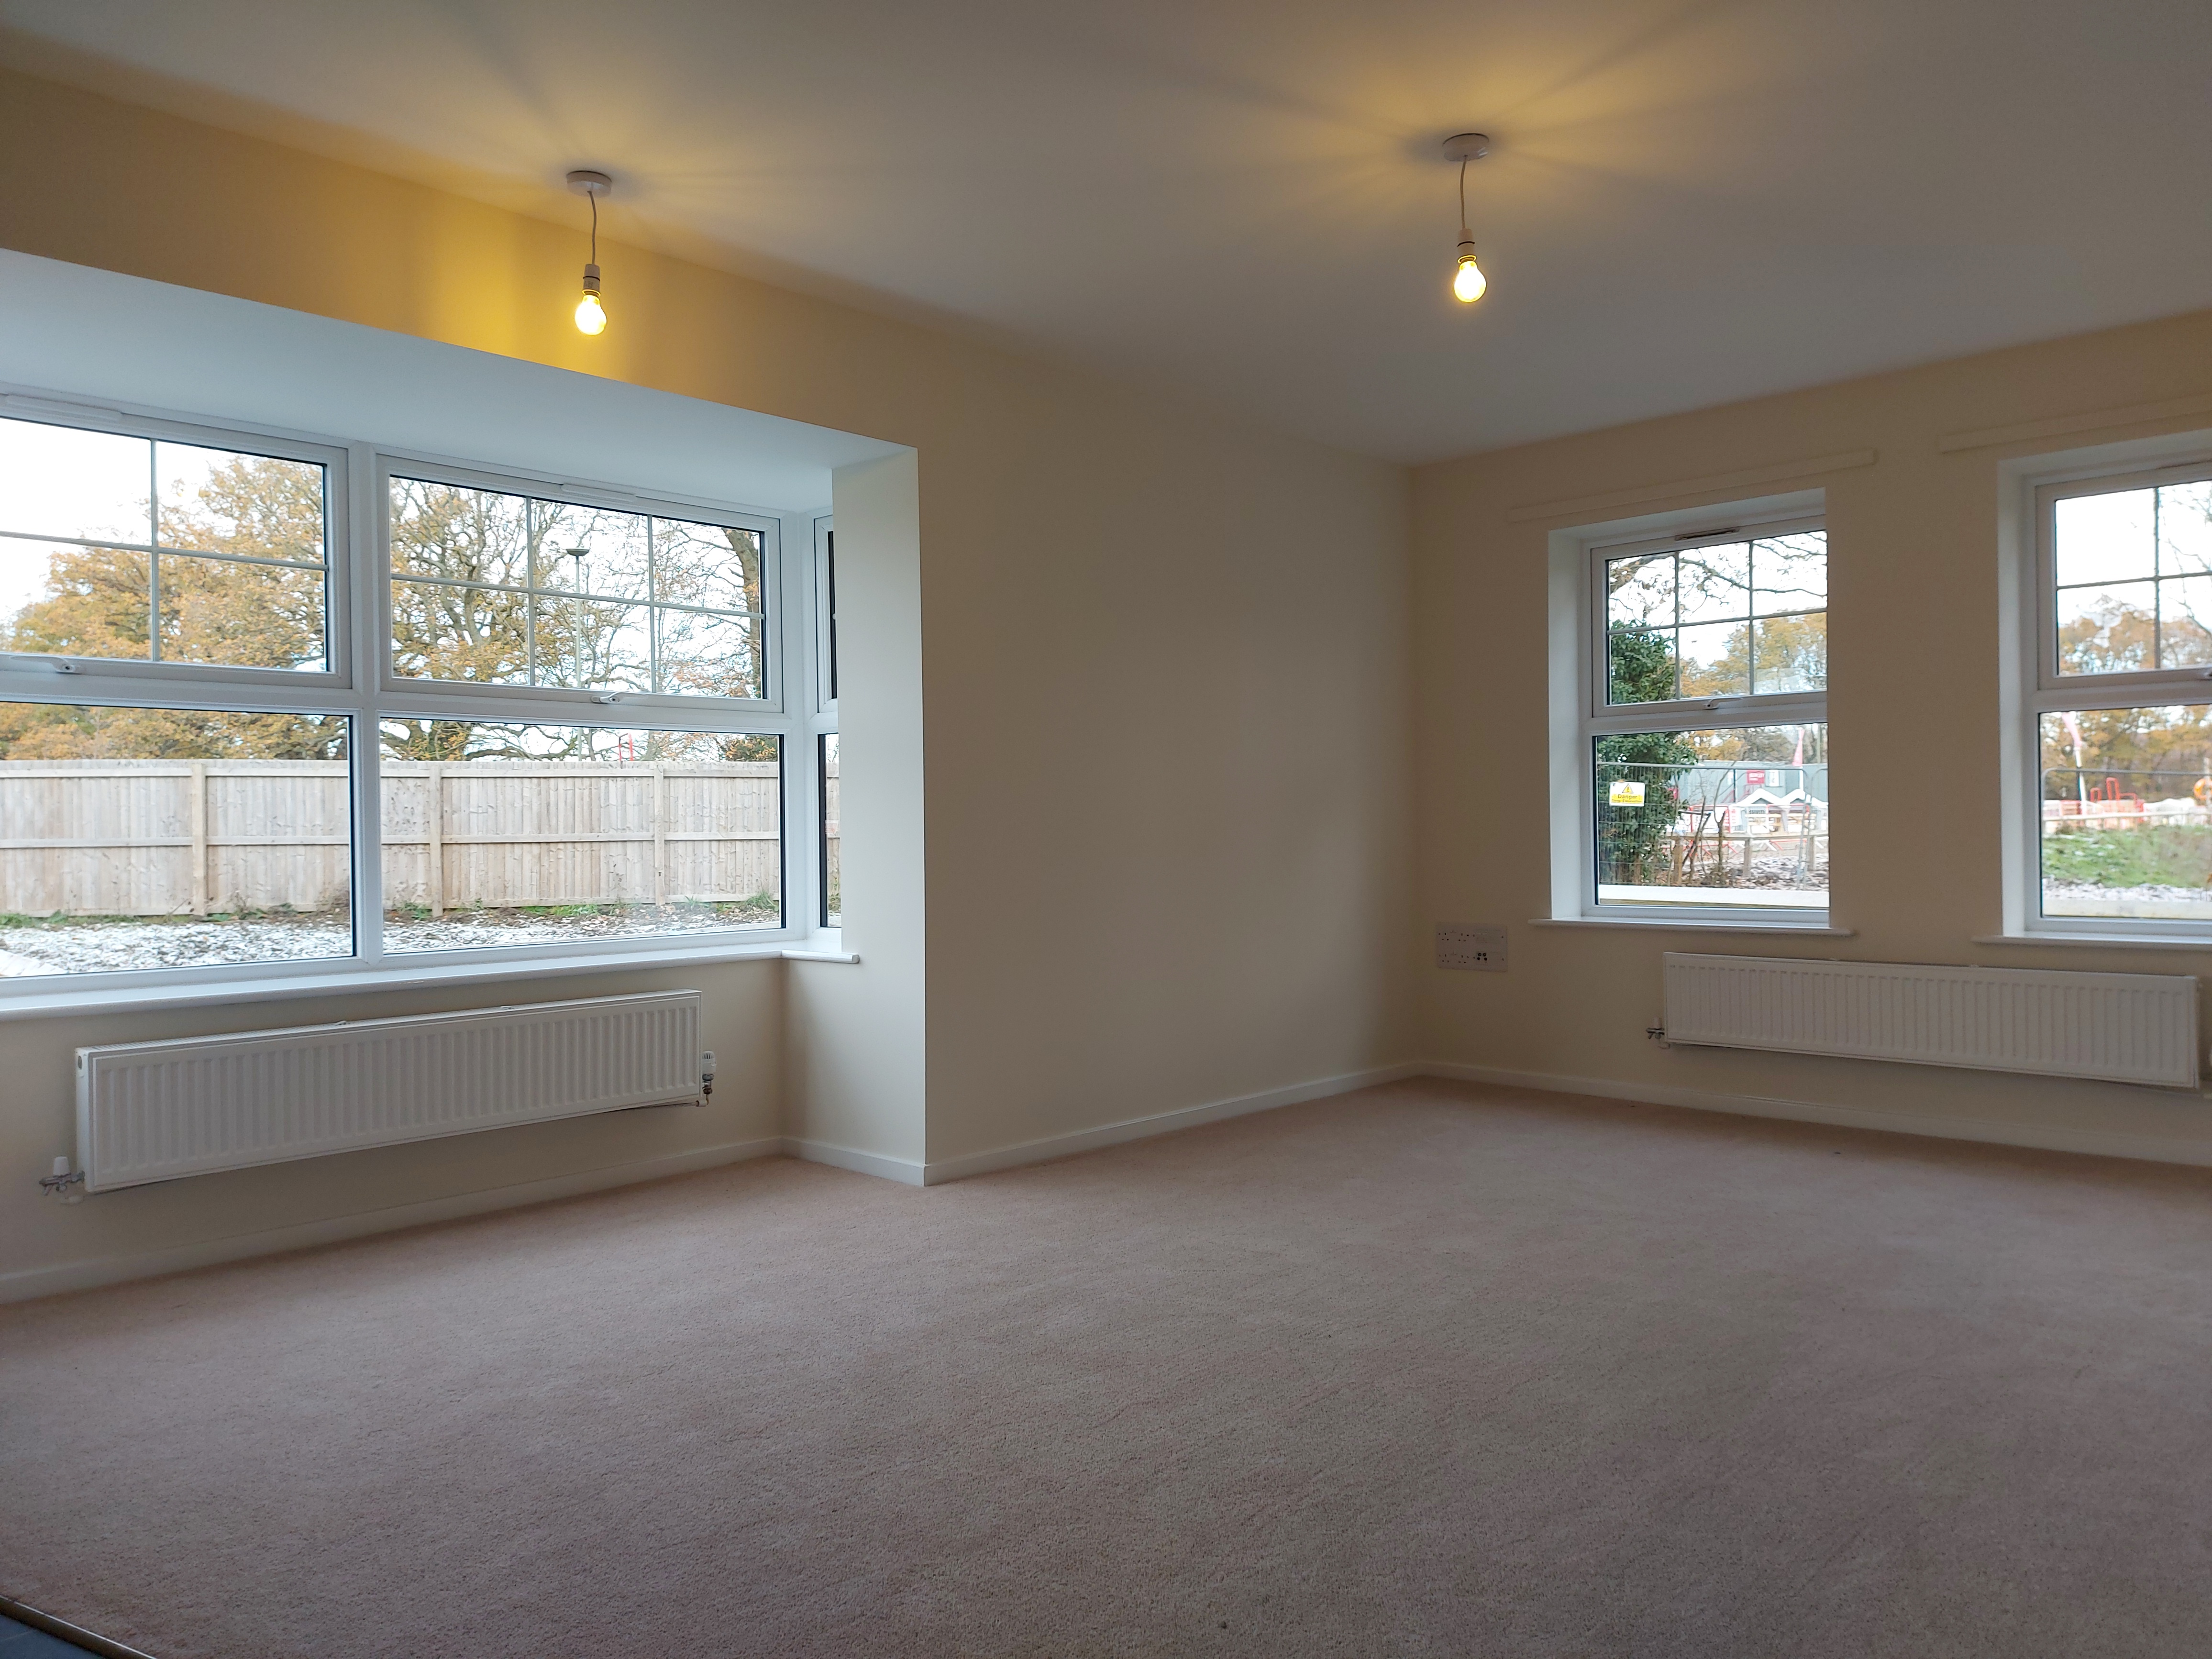 Photo of a Living Room at a Shared Ownership property at Windmill Place in Ash